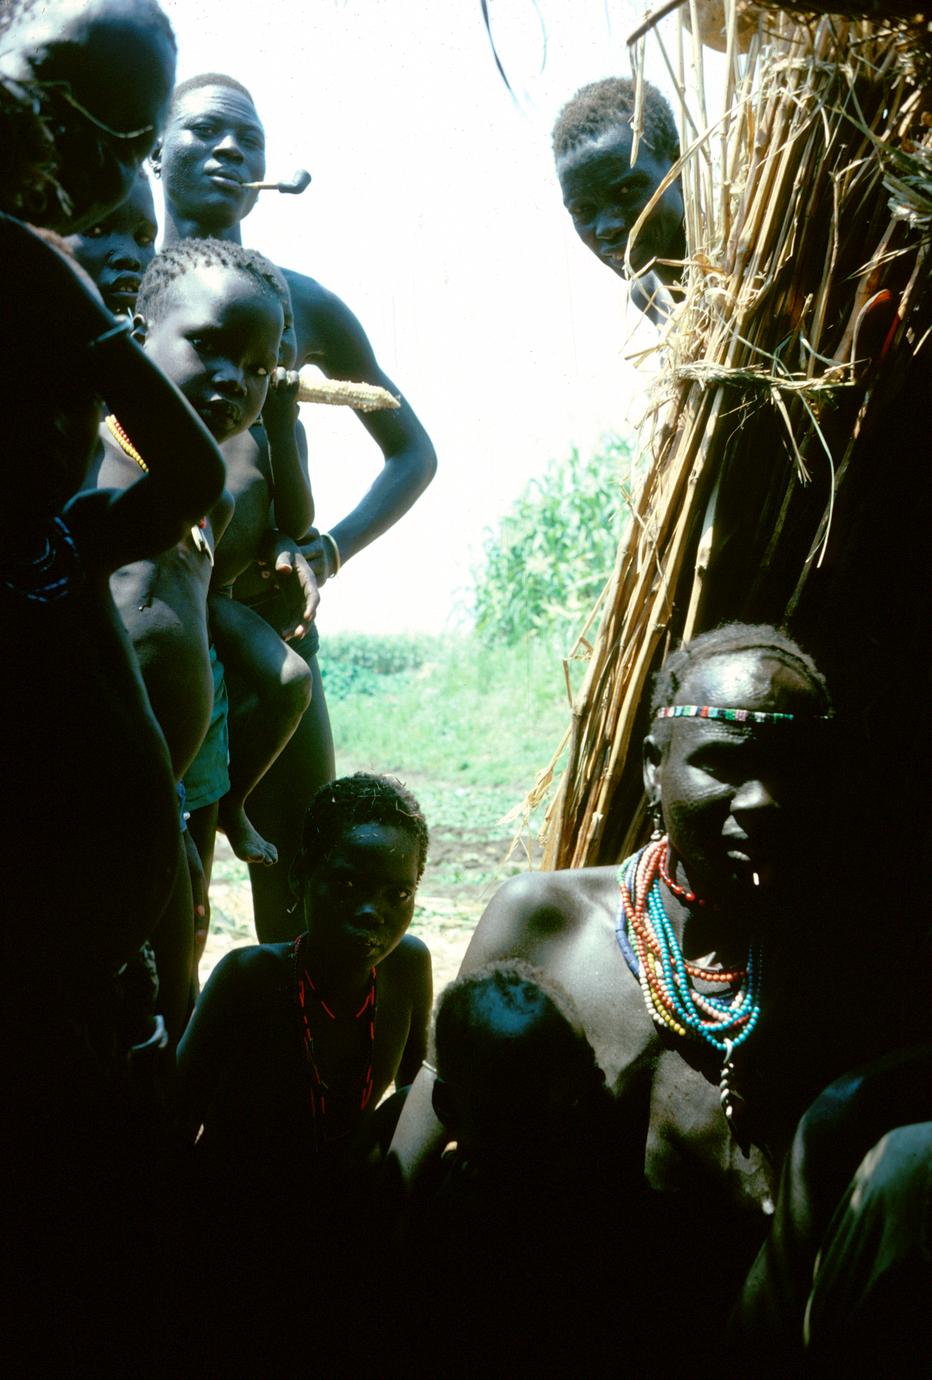 The Visiting Anthropologist is Greeted by Members of the Village